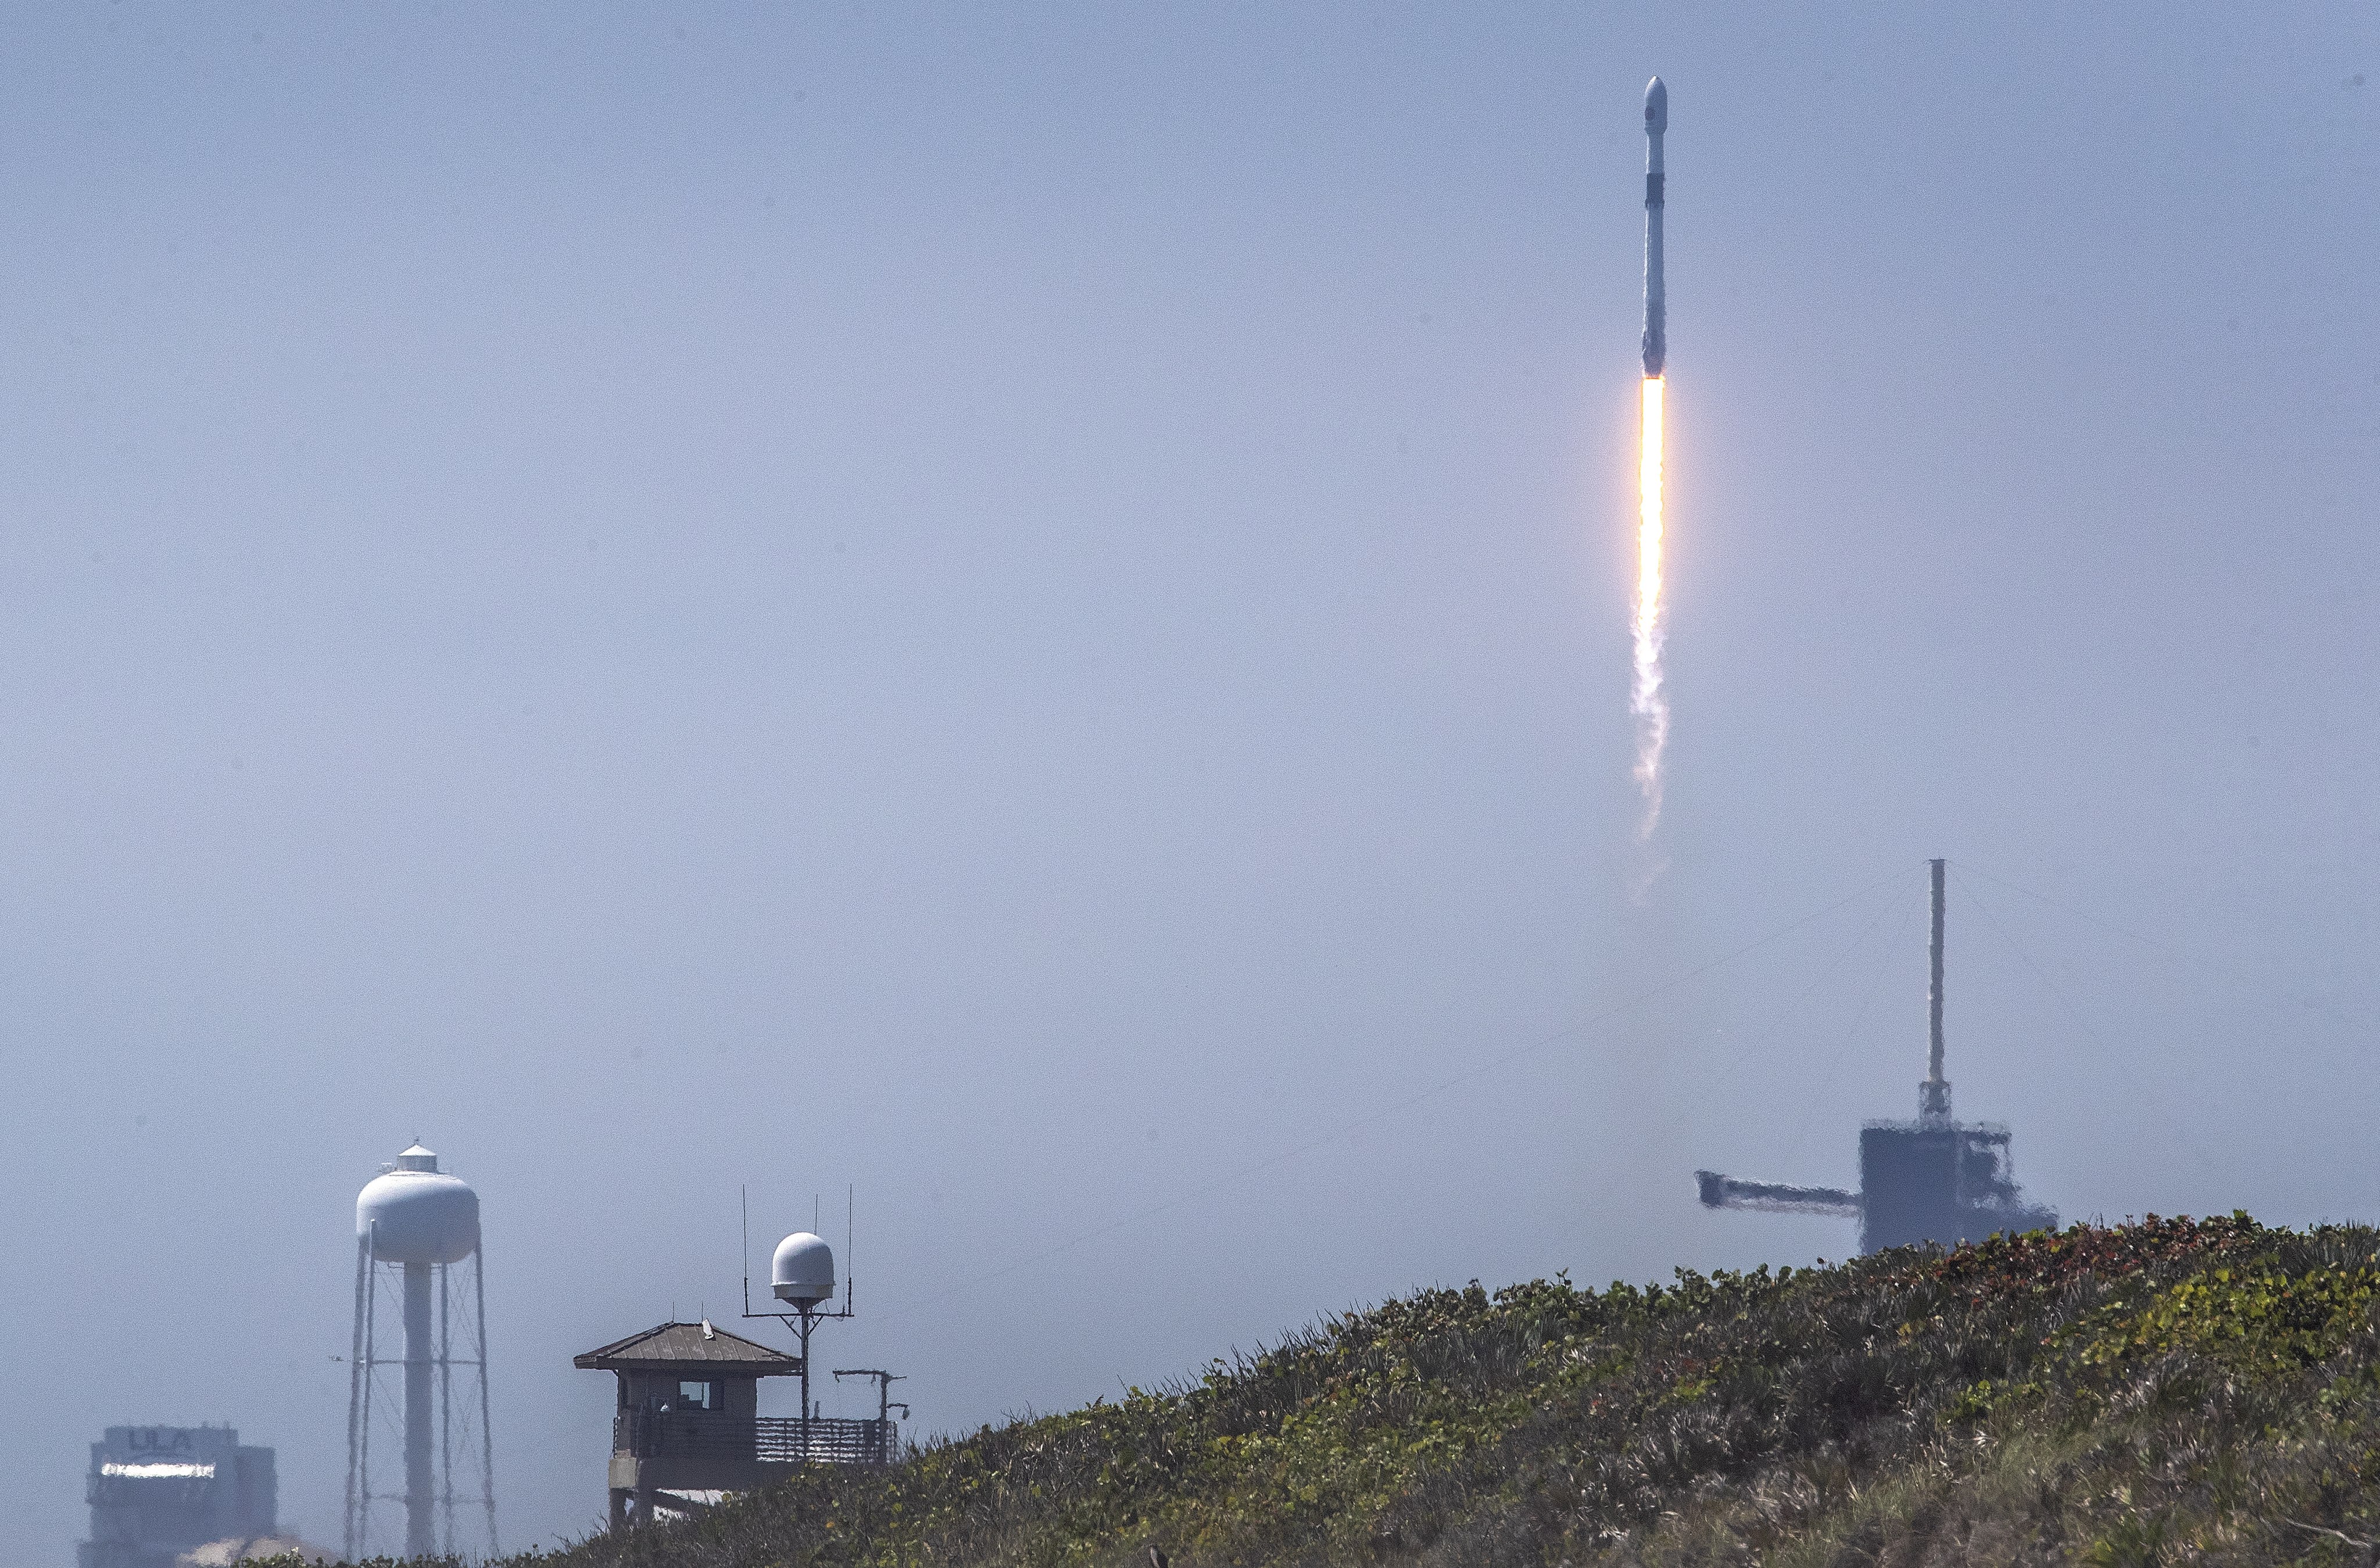 The European Space Agency’s Euclid Telescope mission lifts off on a SpaceX Falcon 9 rocket from the Kennedy Space Centre in Florida, US on Saturday. Photo: EPA-EFE